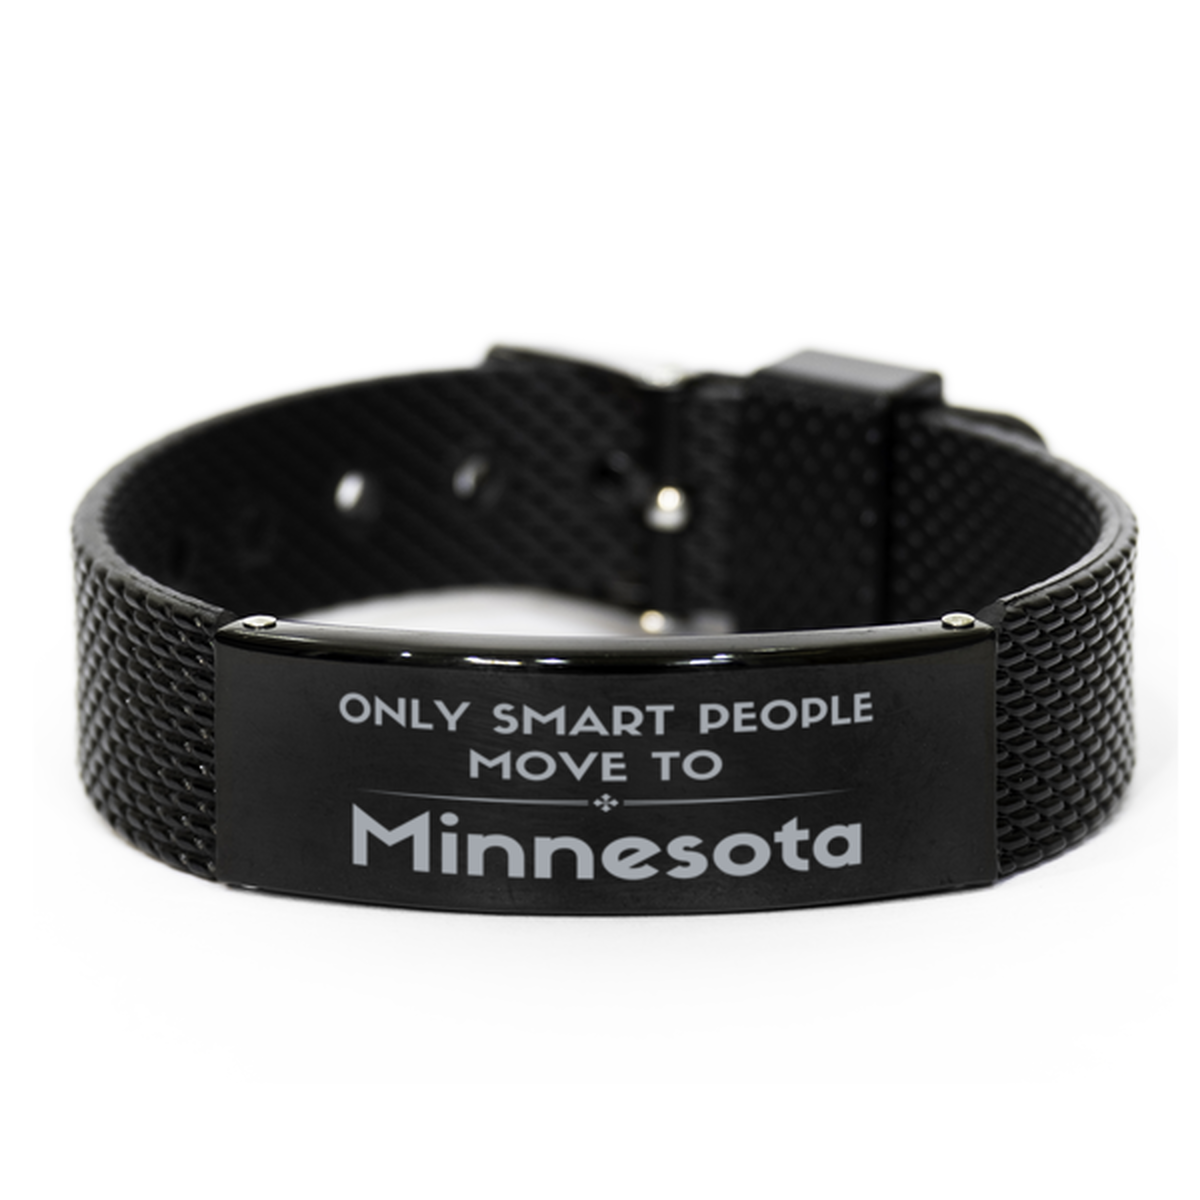 Only smart people move to Minnesota Black Shark Mesh Bracelet, Gag Gifts For Minnesota, Move to Minnesota Gifts for Friends Coworker Funny Saying Quote